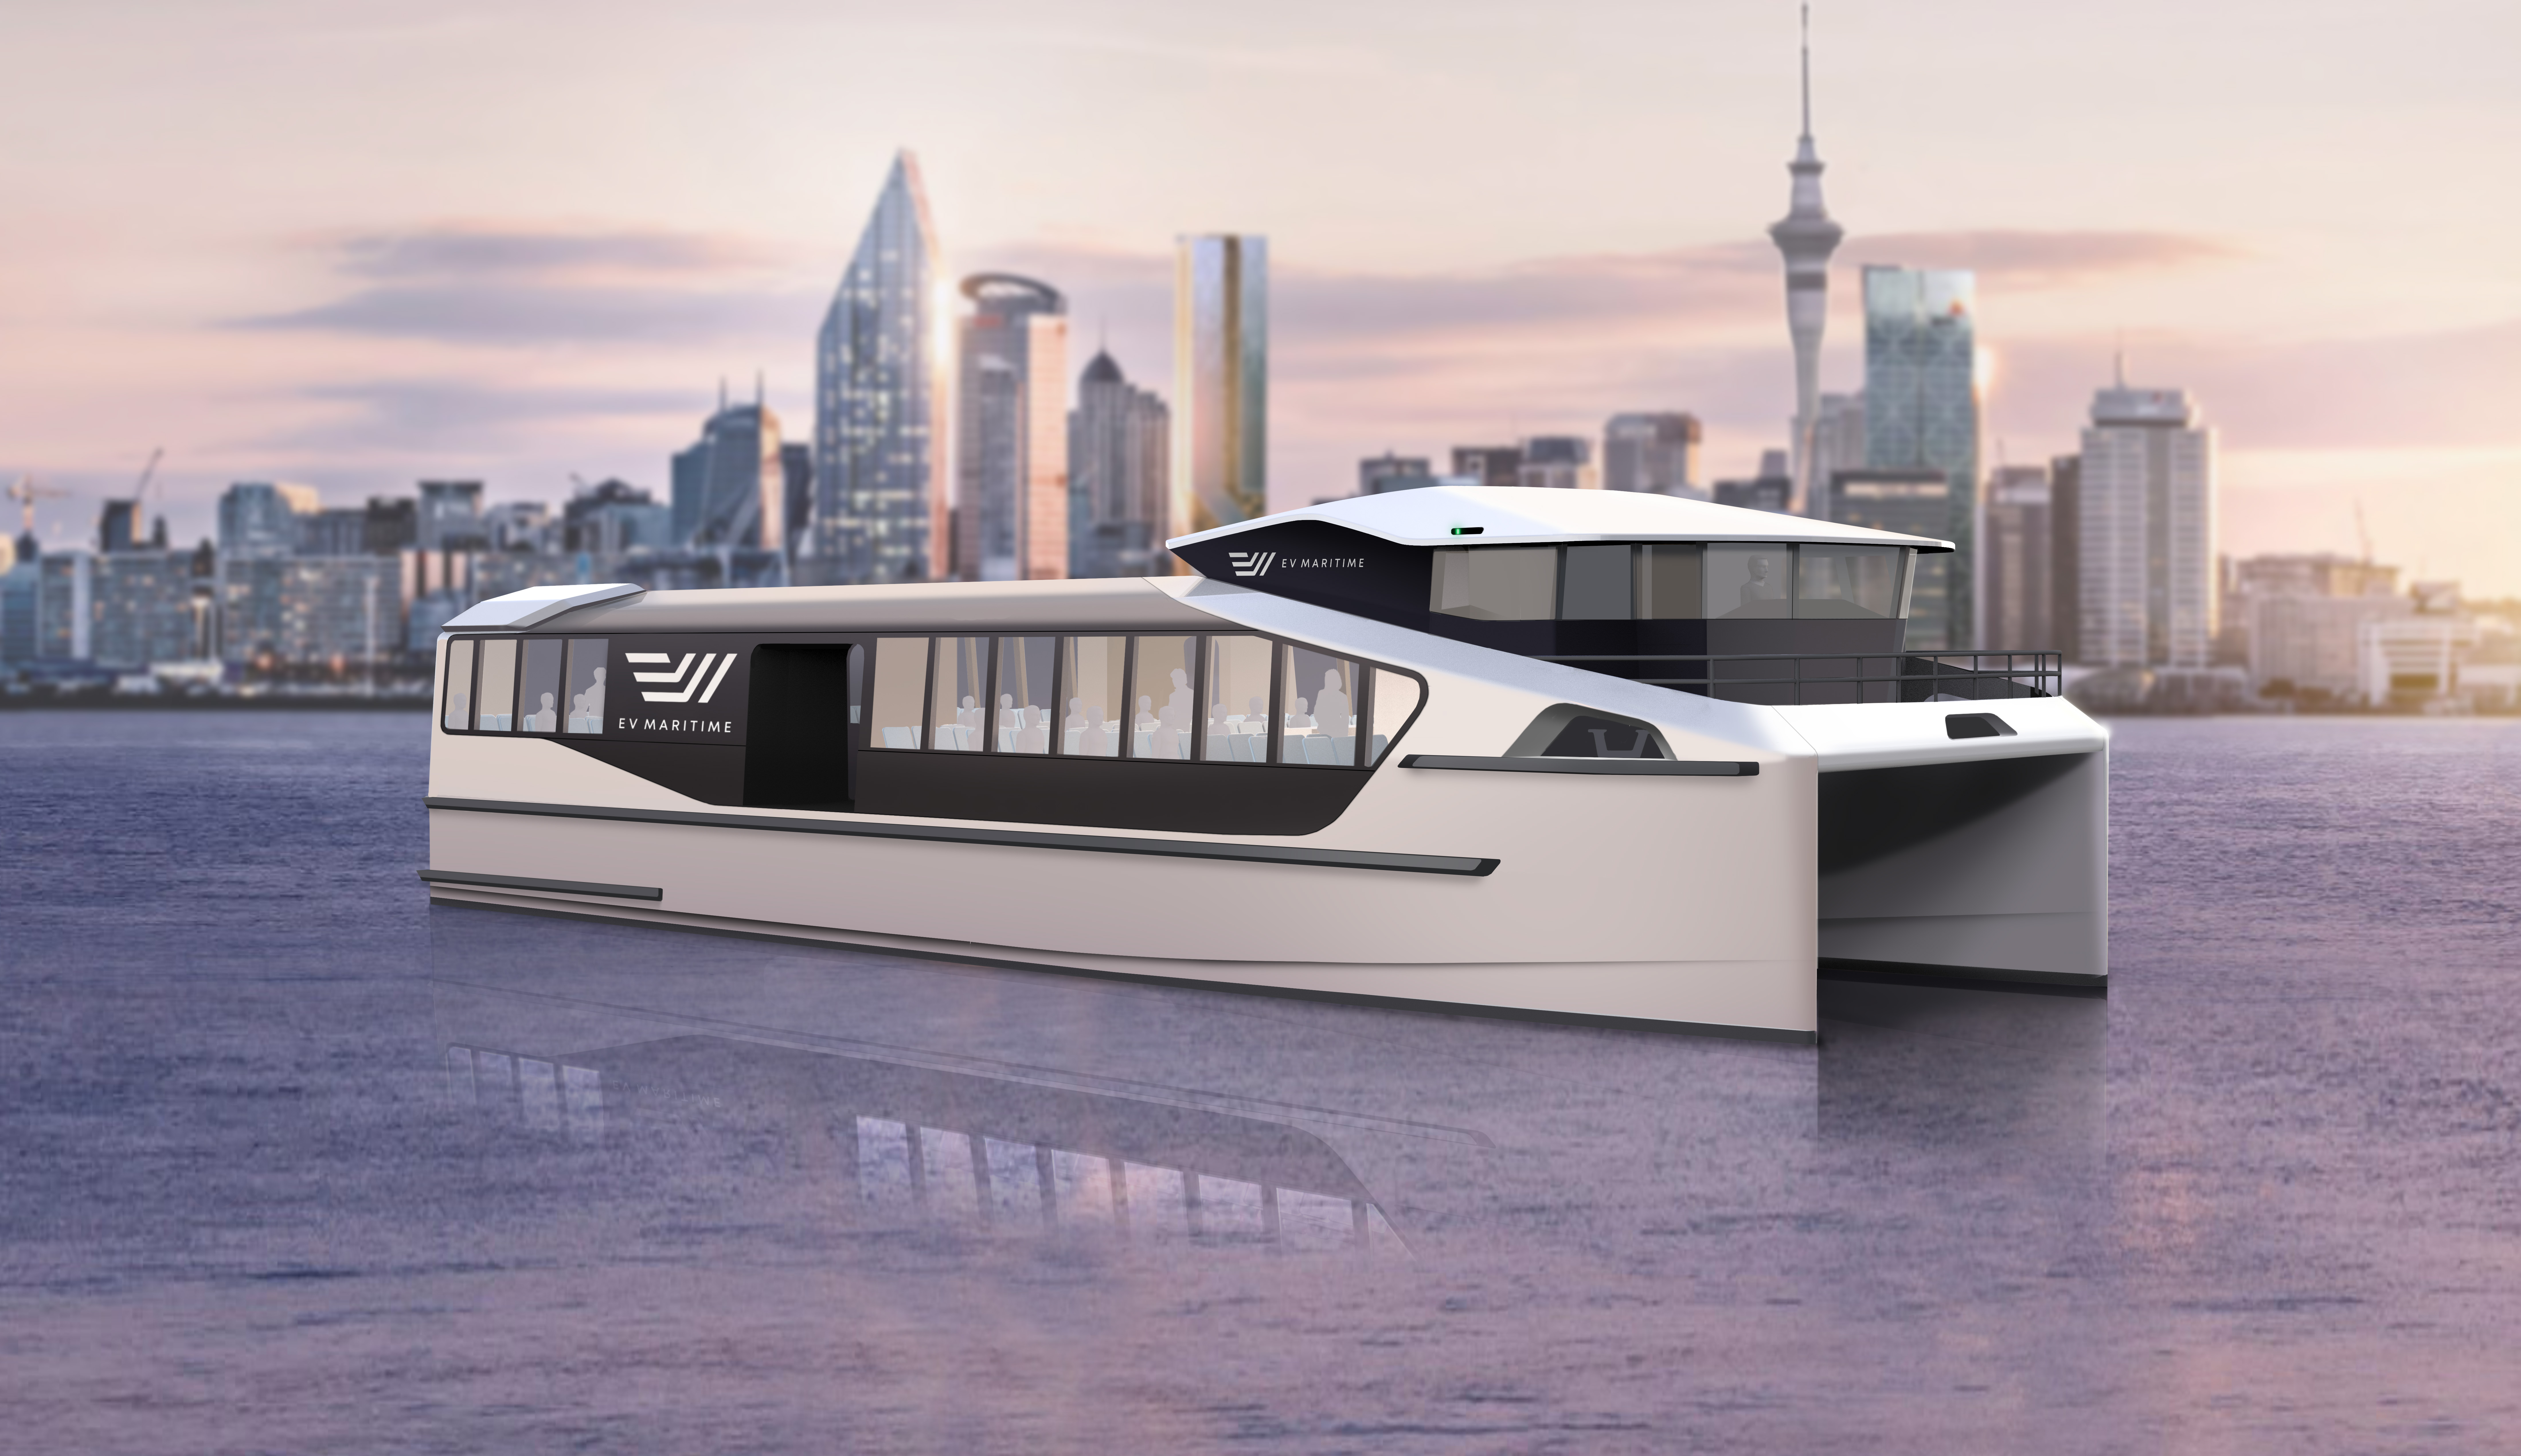 Getting Auckland’s new electric ferry deal over the line